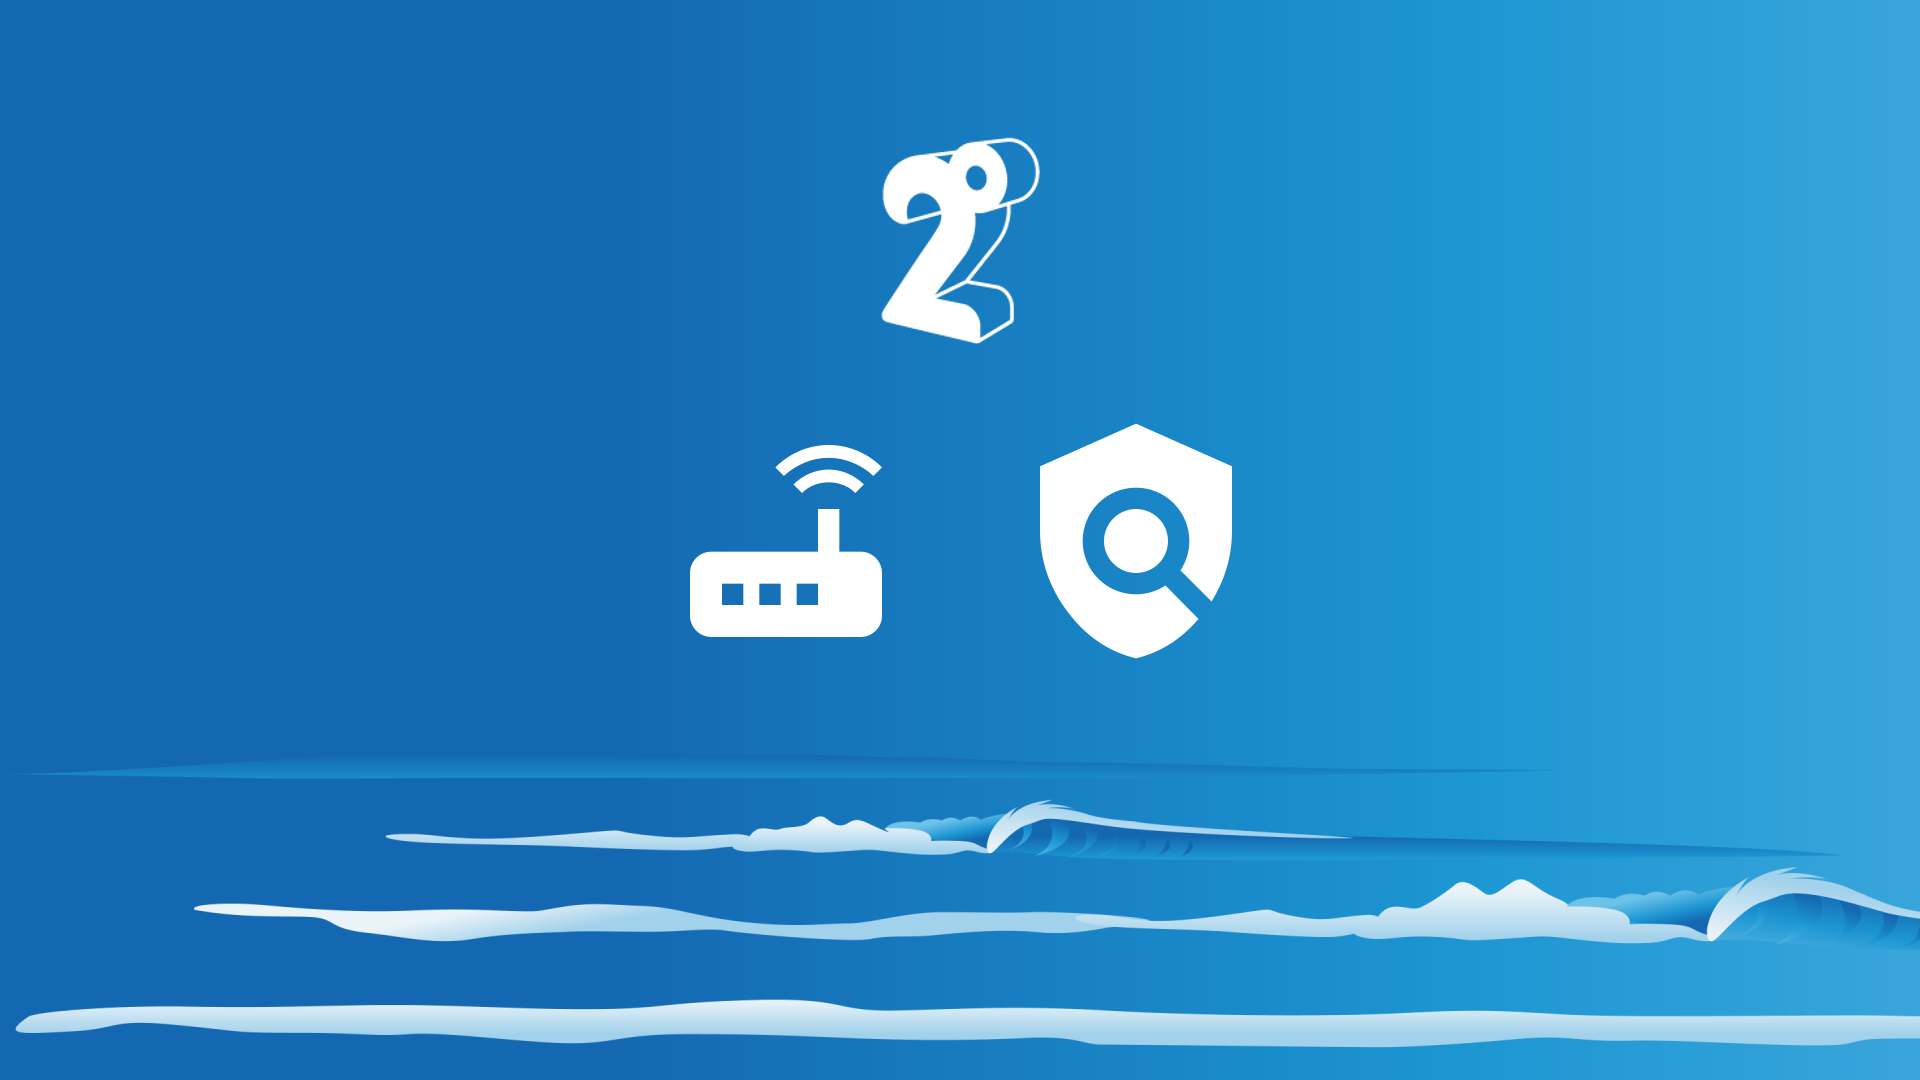 Sea background with 2degrees logo and wireless router icon